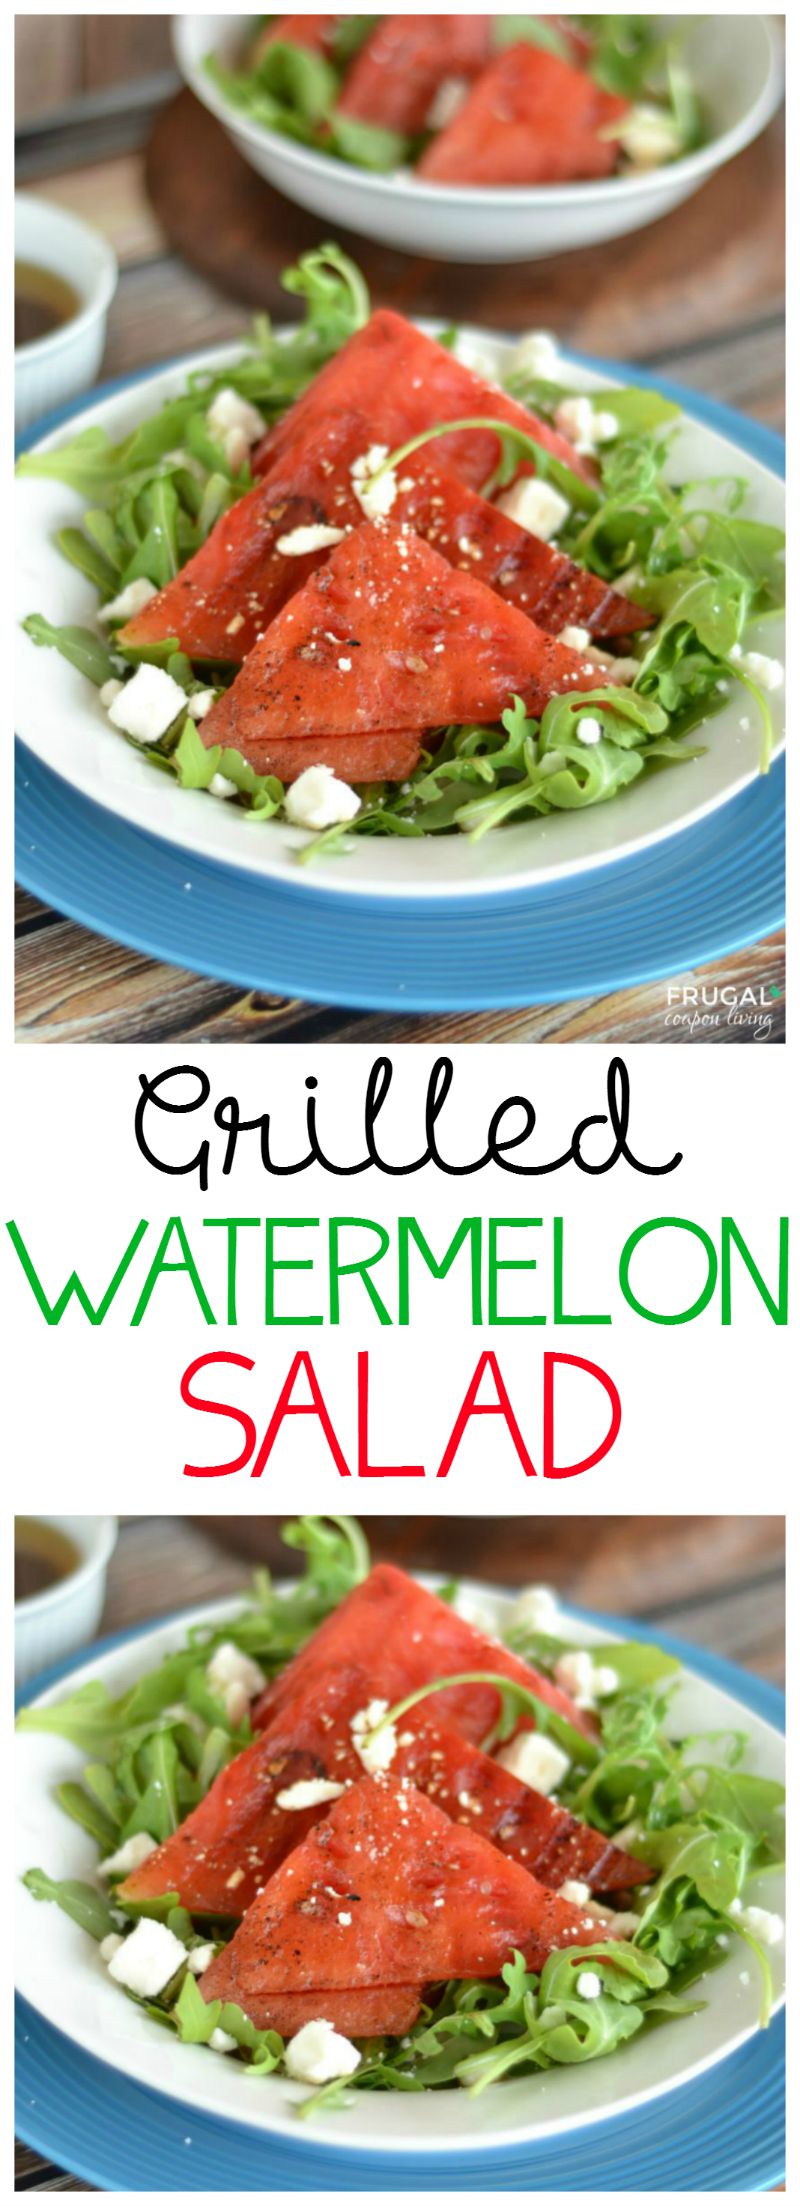 grilled-watermelon-salad-recipe-Collage-frugal-coupon-living